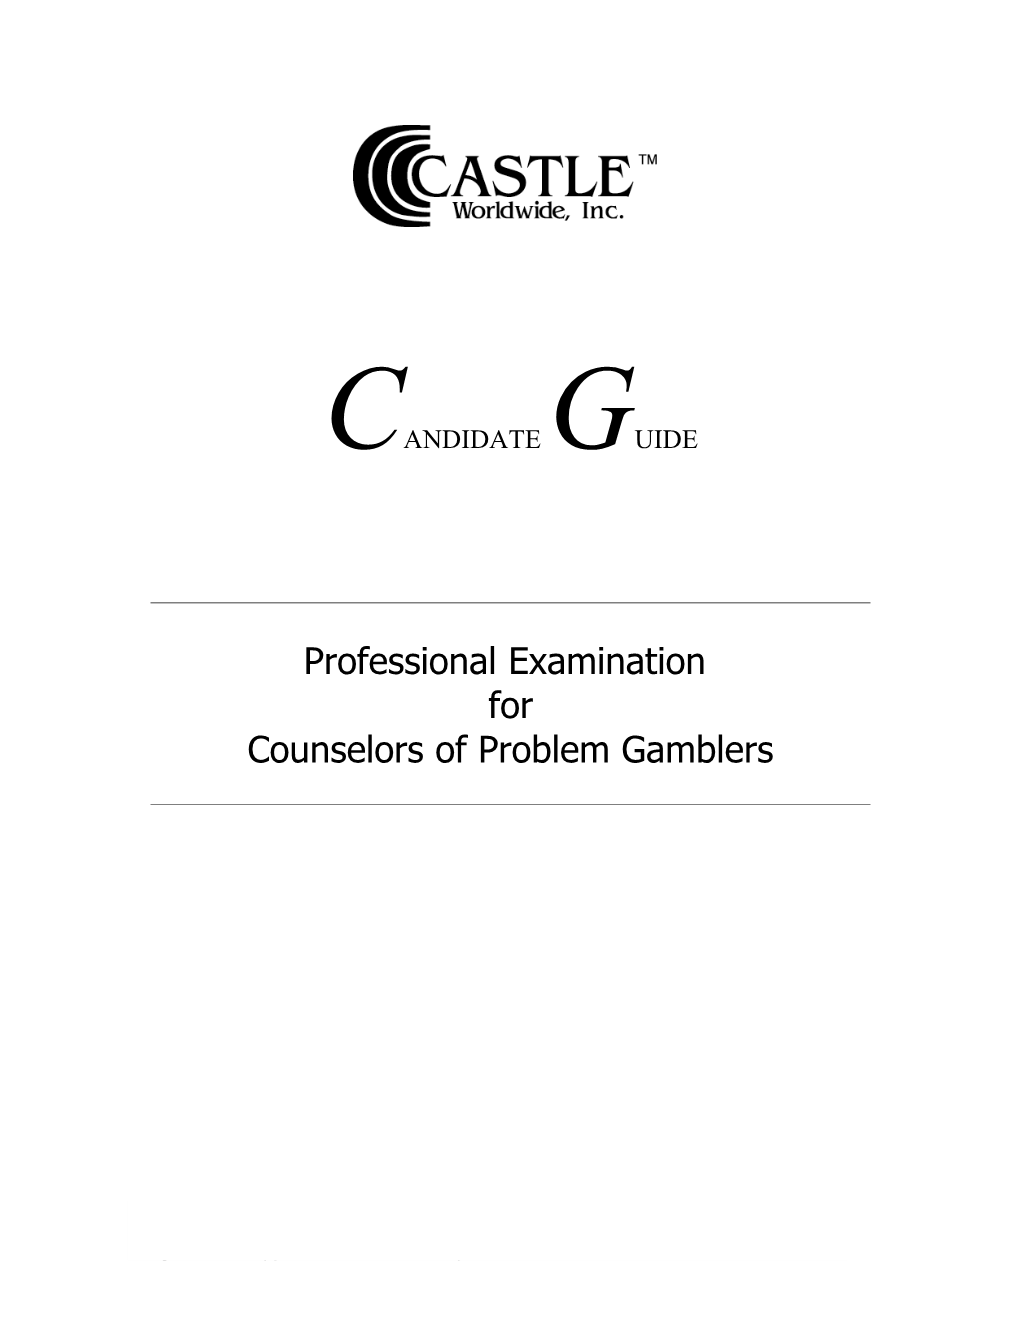 Candidate Guide for the National Examination for Counselors for Problem Gamblers